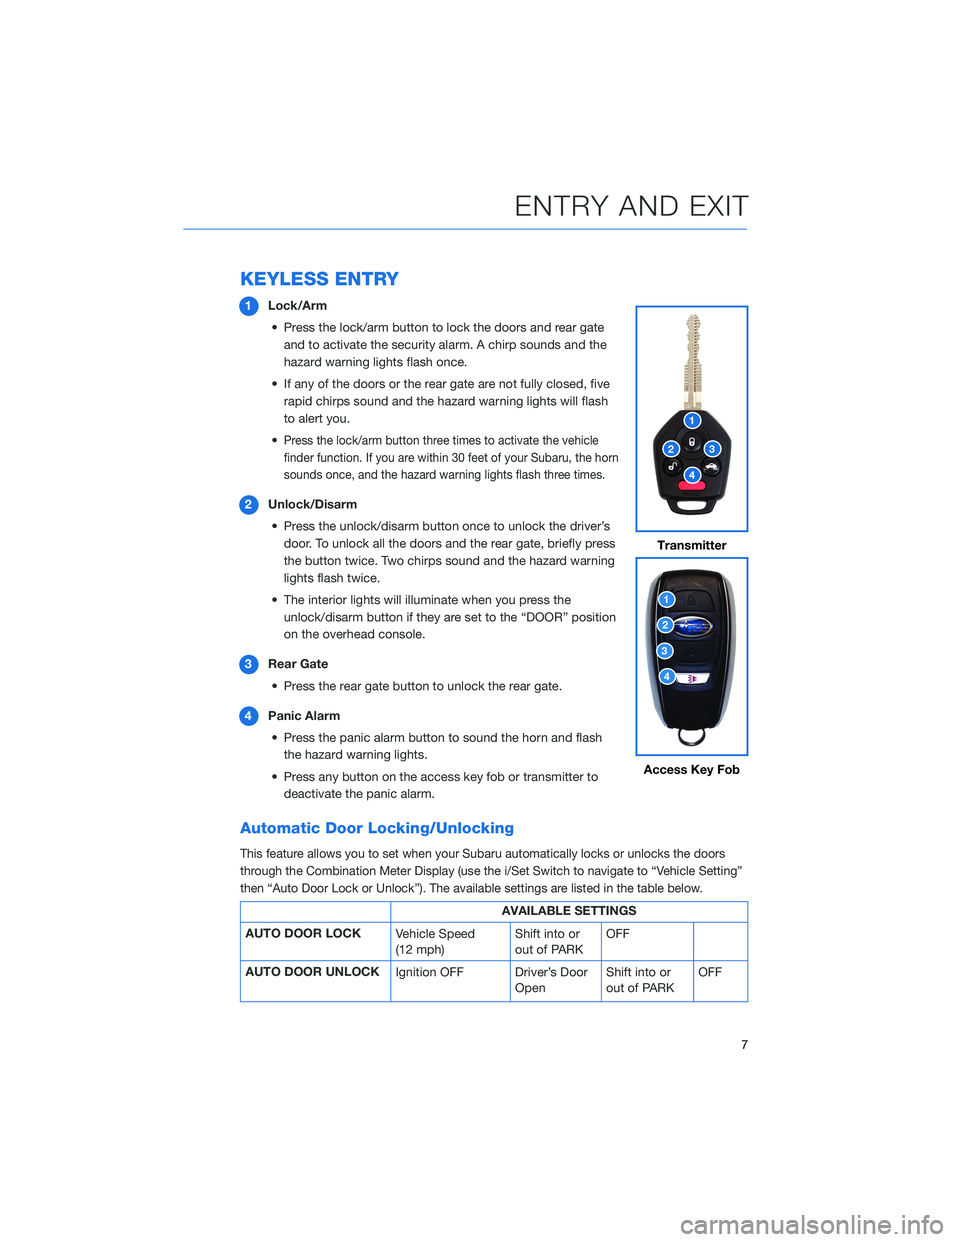 SUBARU CROSSTREK 2021  Getting Started Guide KEYLESS ENTRY
1Lock/Arm
• Press the lock/arm button to lock the doors and rear gate
and to activate the security alarm. A chirp sounds and the
hazard warning lights flash once.
• If any of the doo